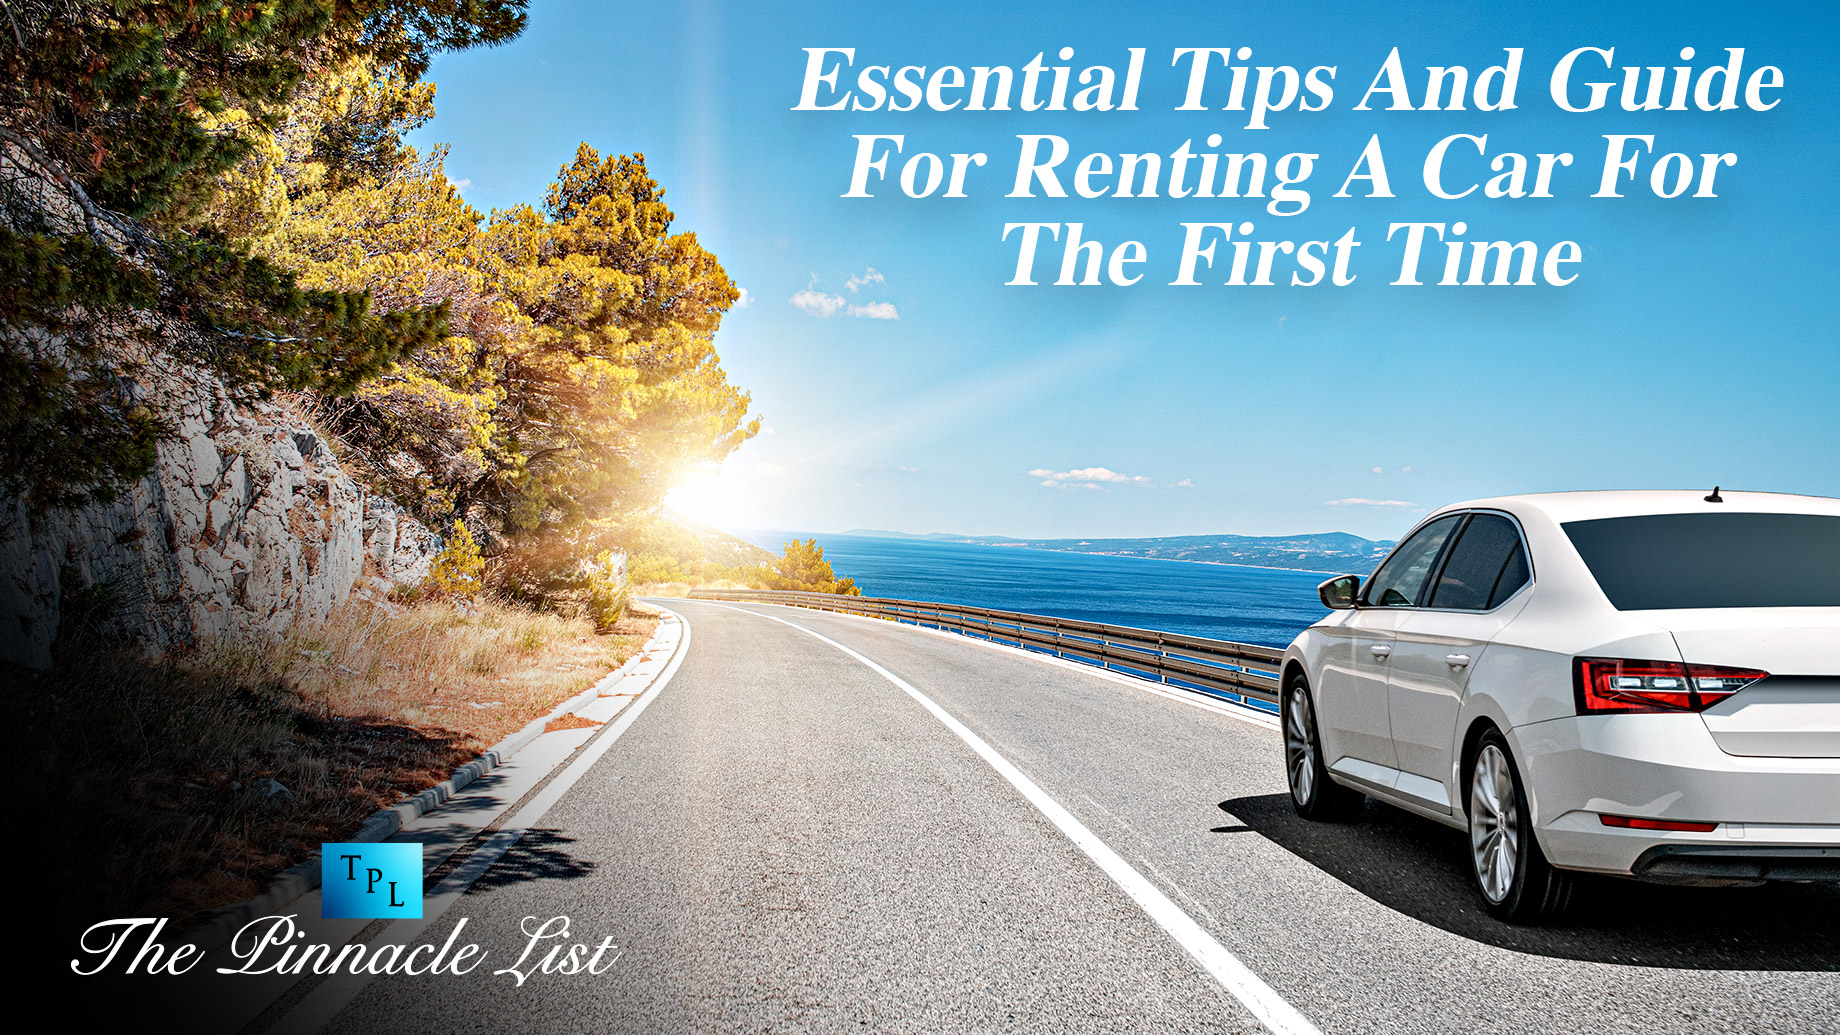 Essential Tips And Guide For Renting A Car For The First Time